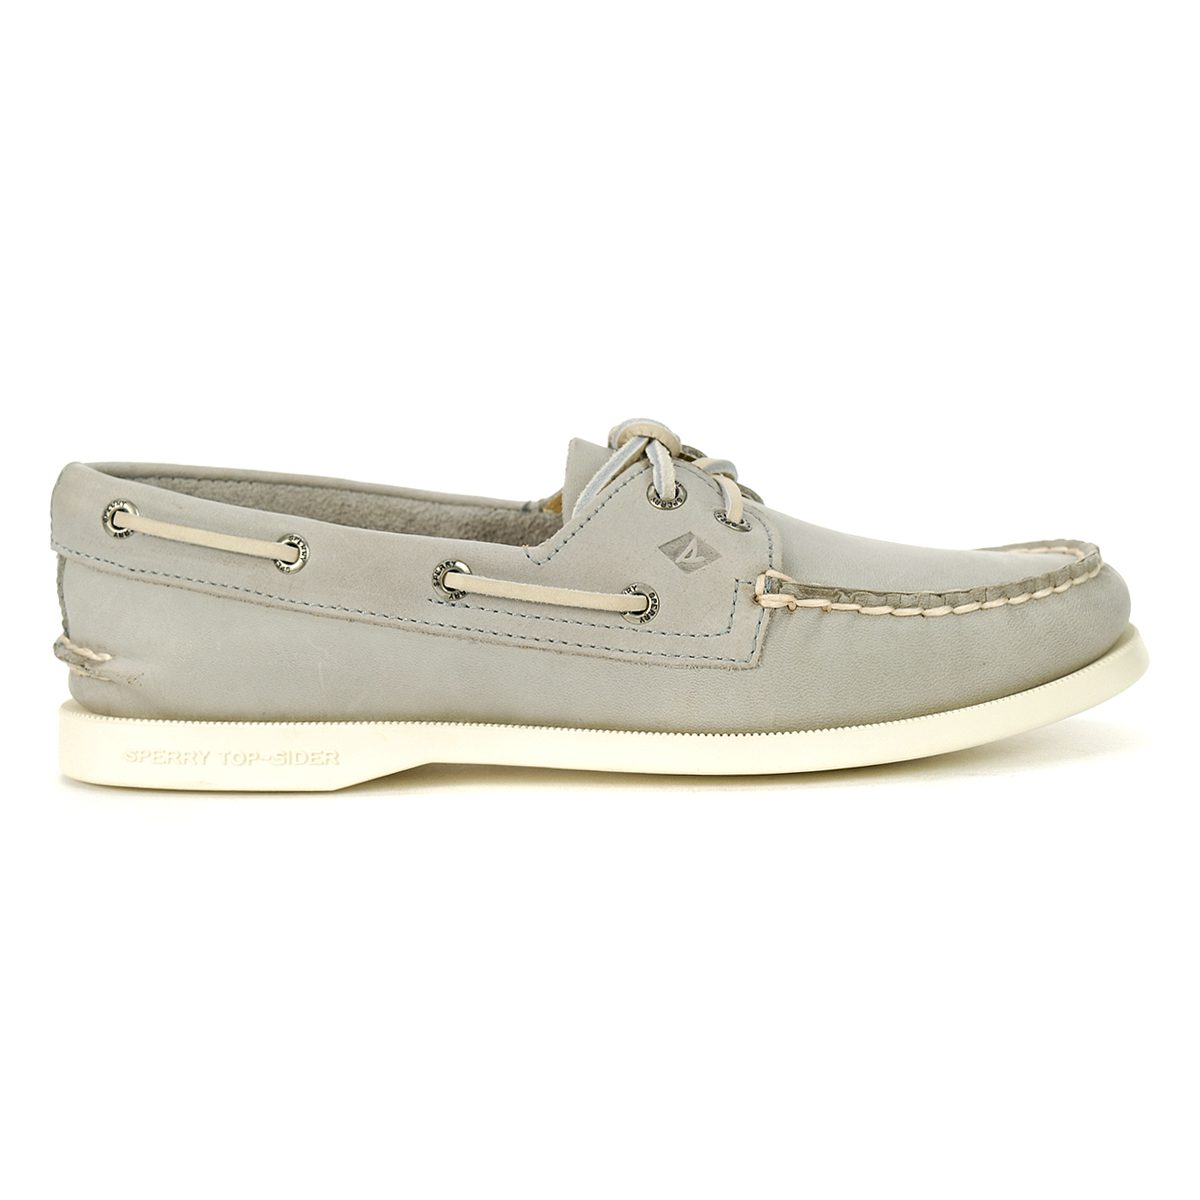 grey sperry shoes